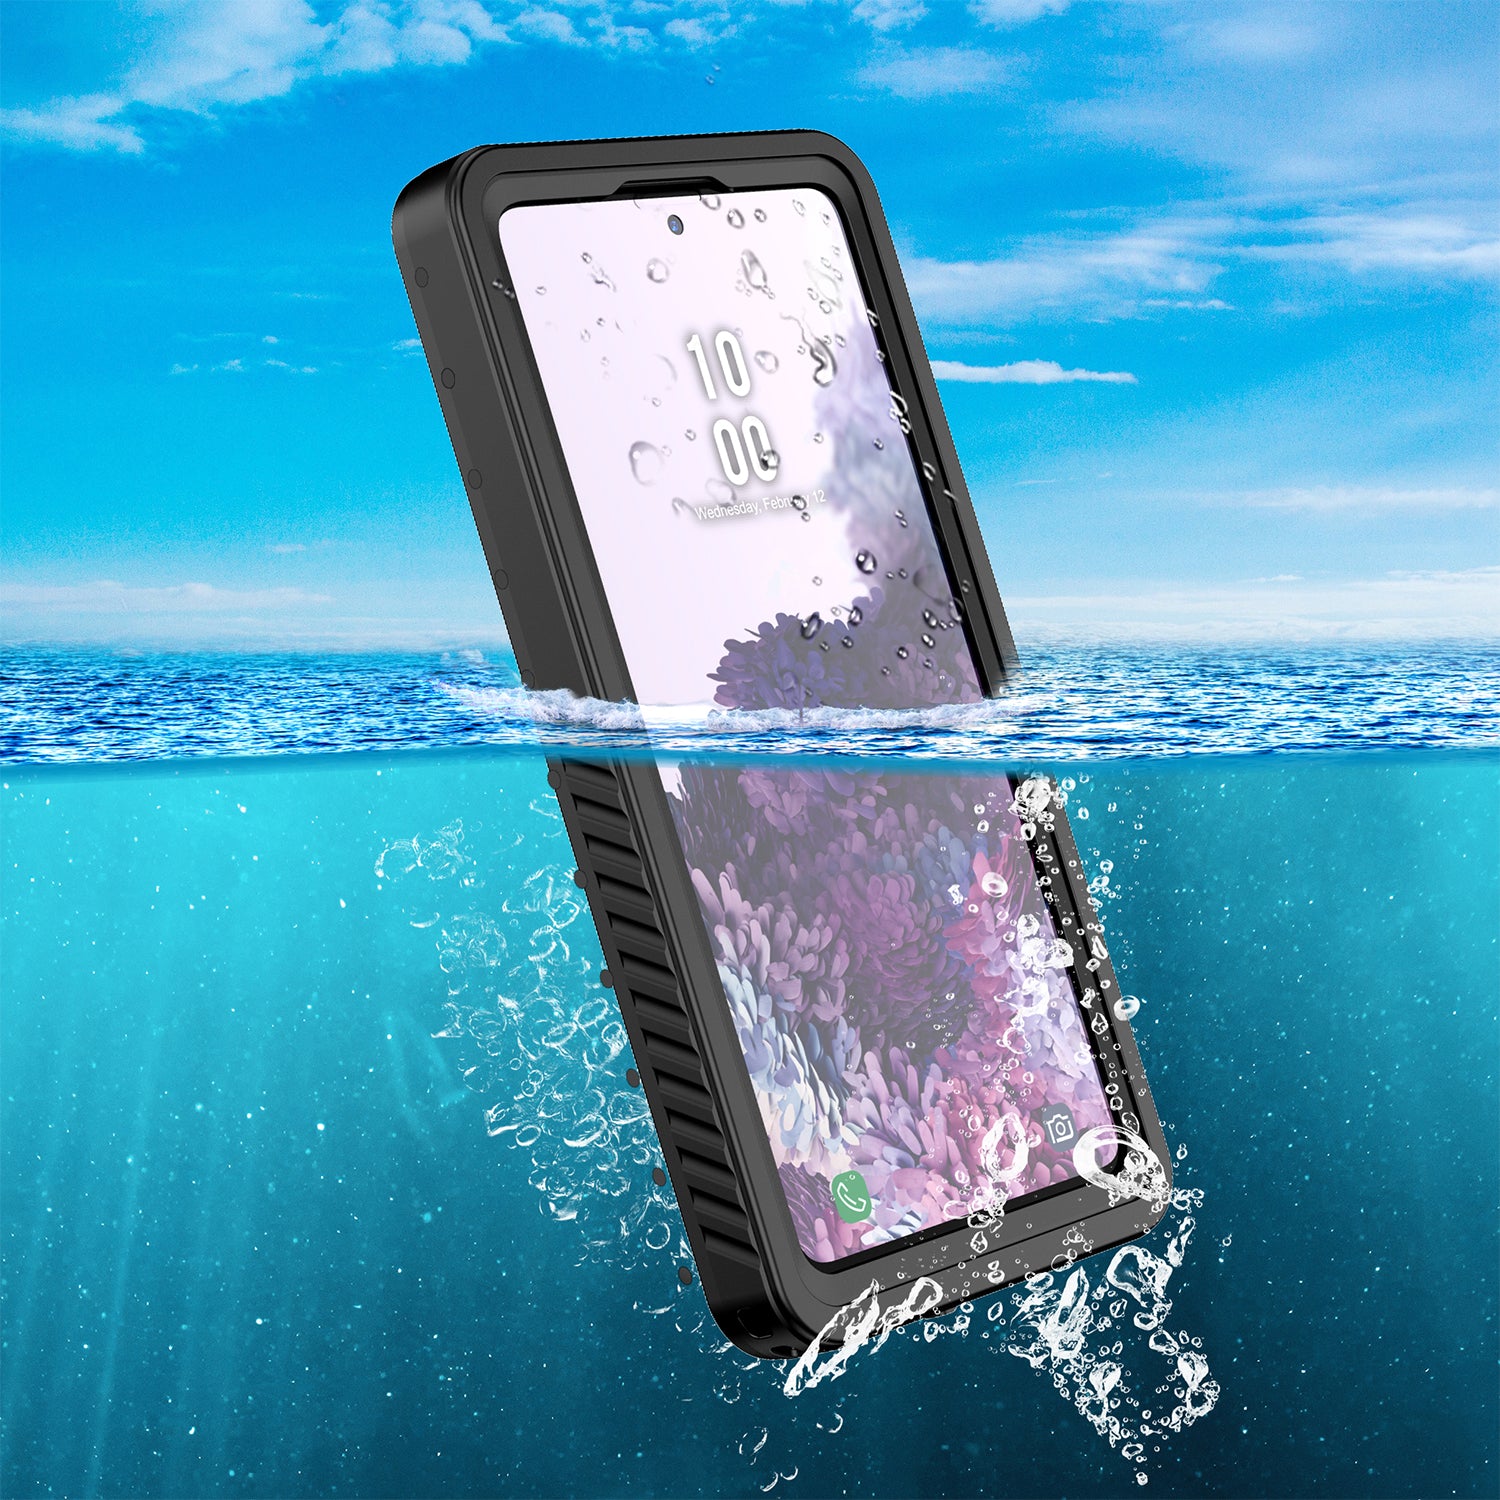 Samsung Galaxy S20 FE 360 Full Protective Waterproof Case with Built-in Screen Fingerprint Protector -Black